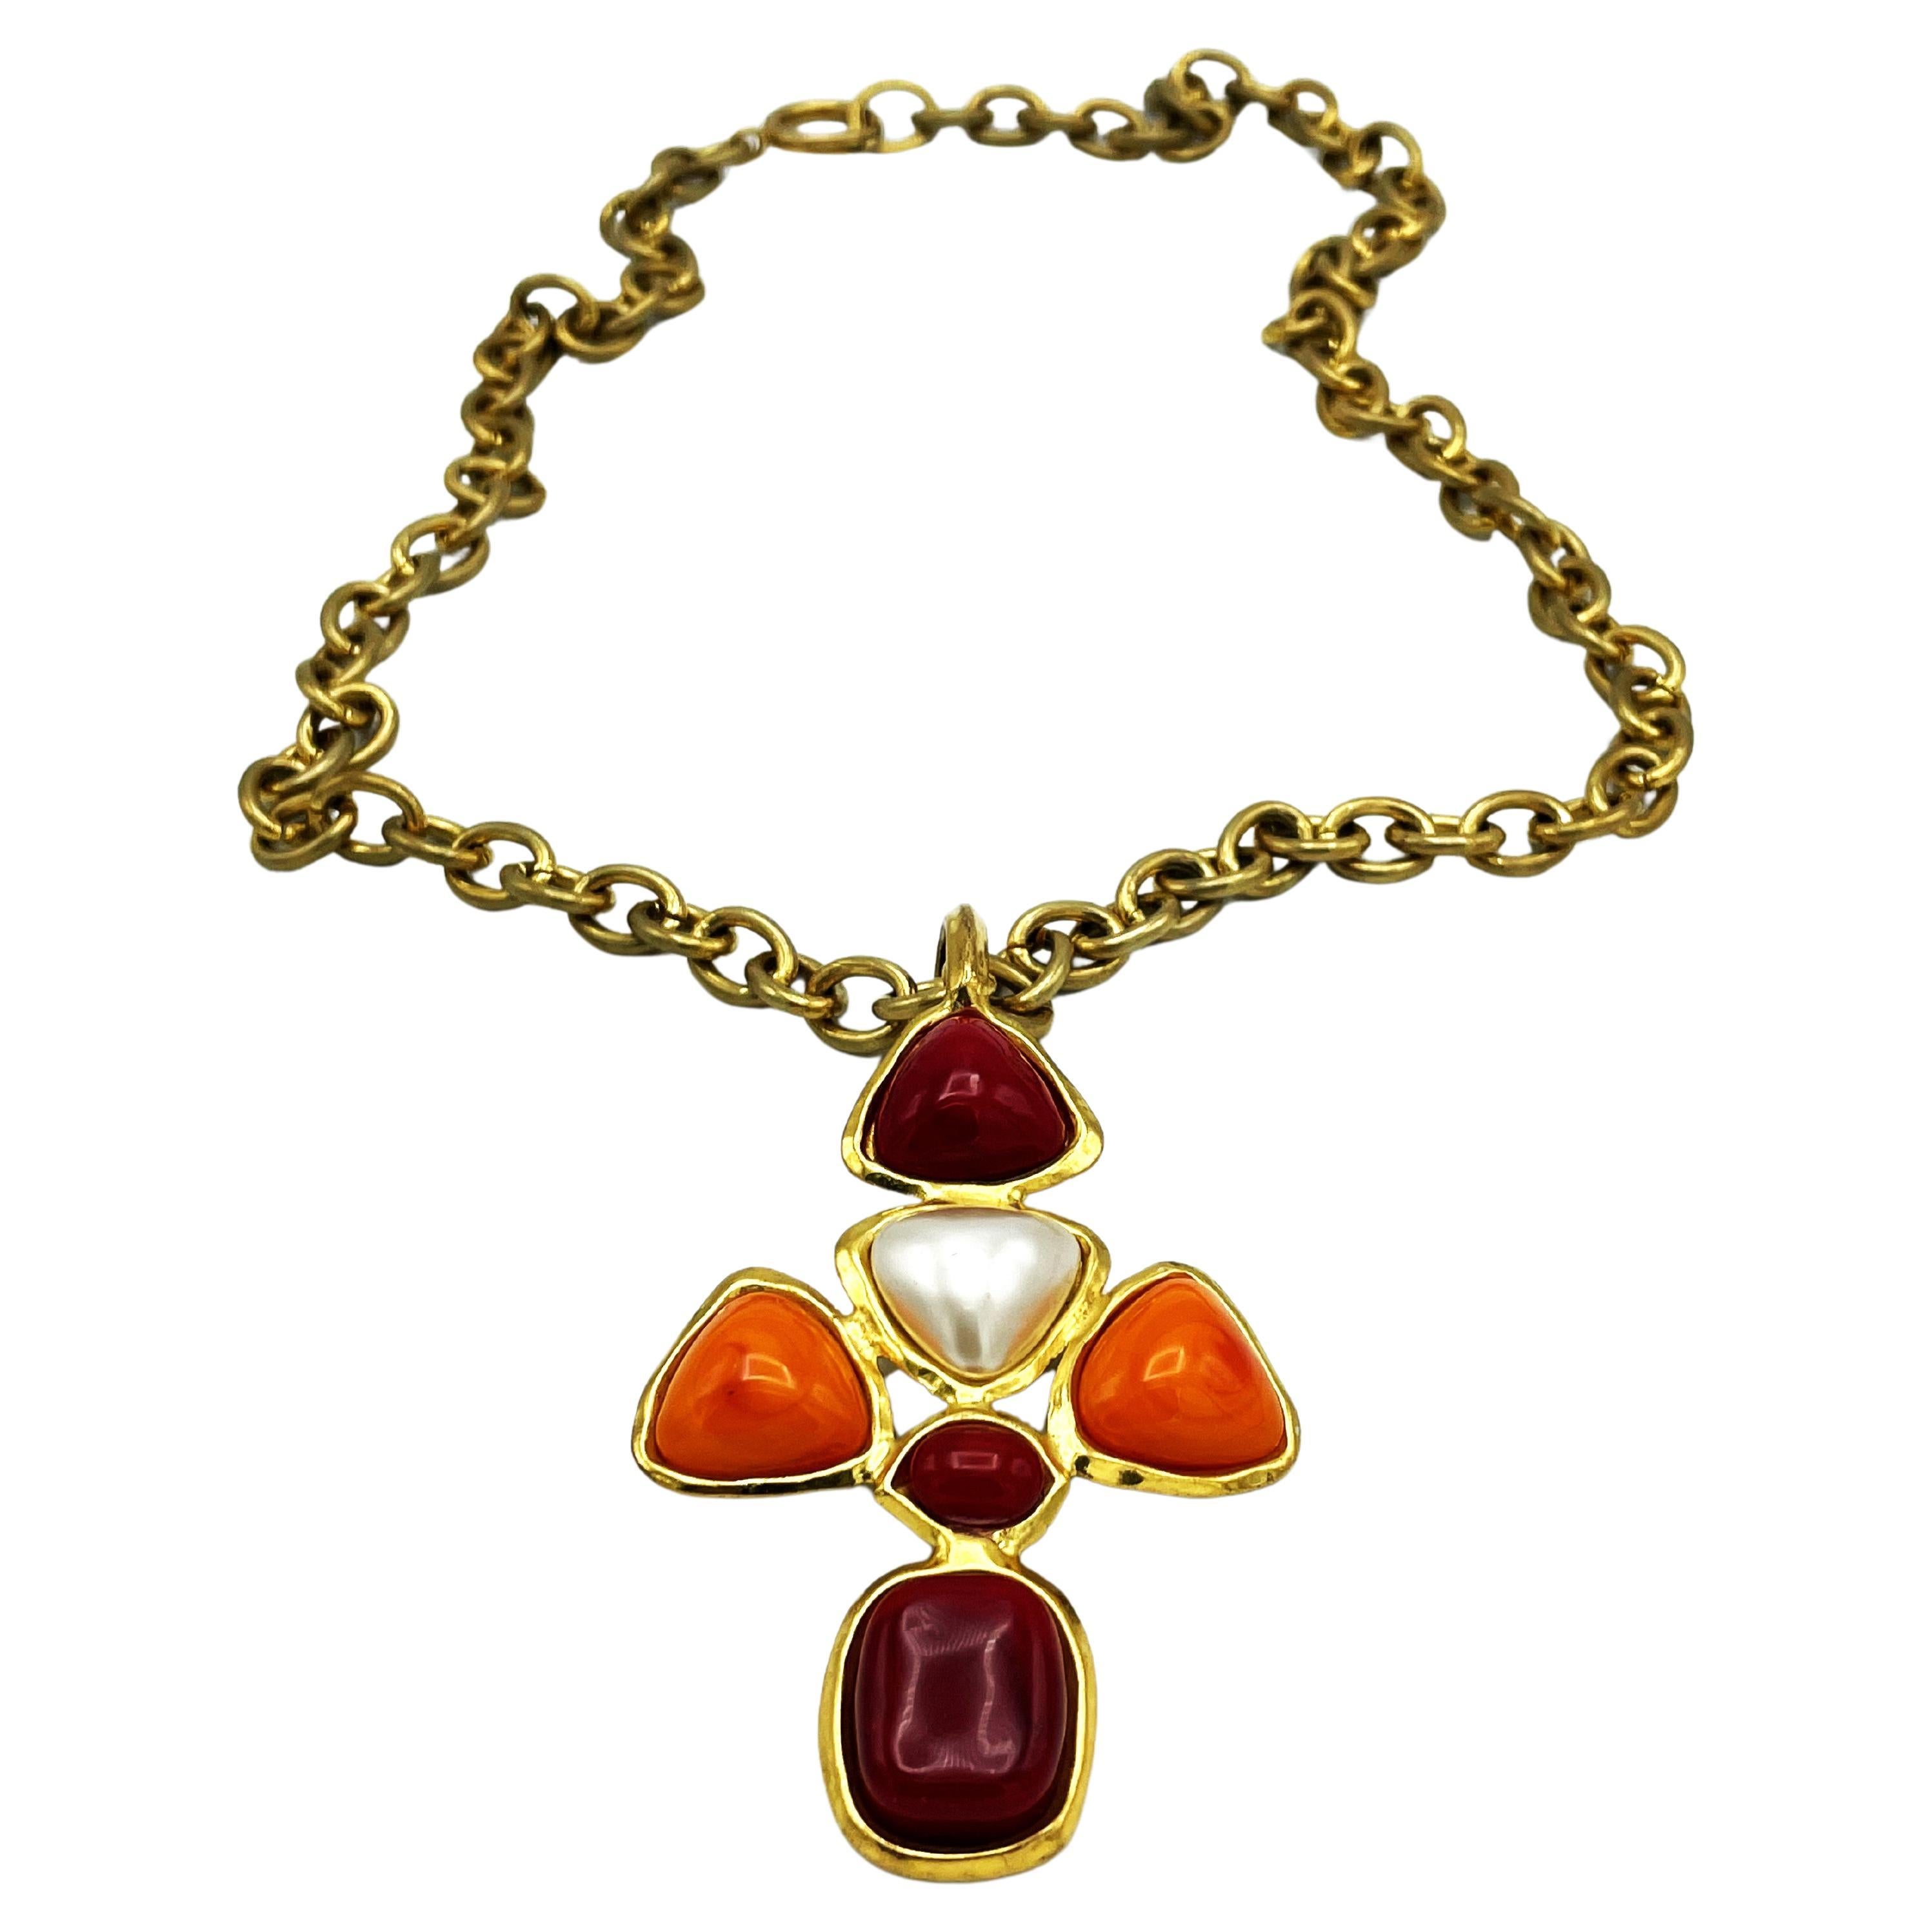 CHANEL CROSS NECKLACE wine red + orange Gripoix glass, faux pearl, signed 93 P